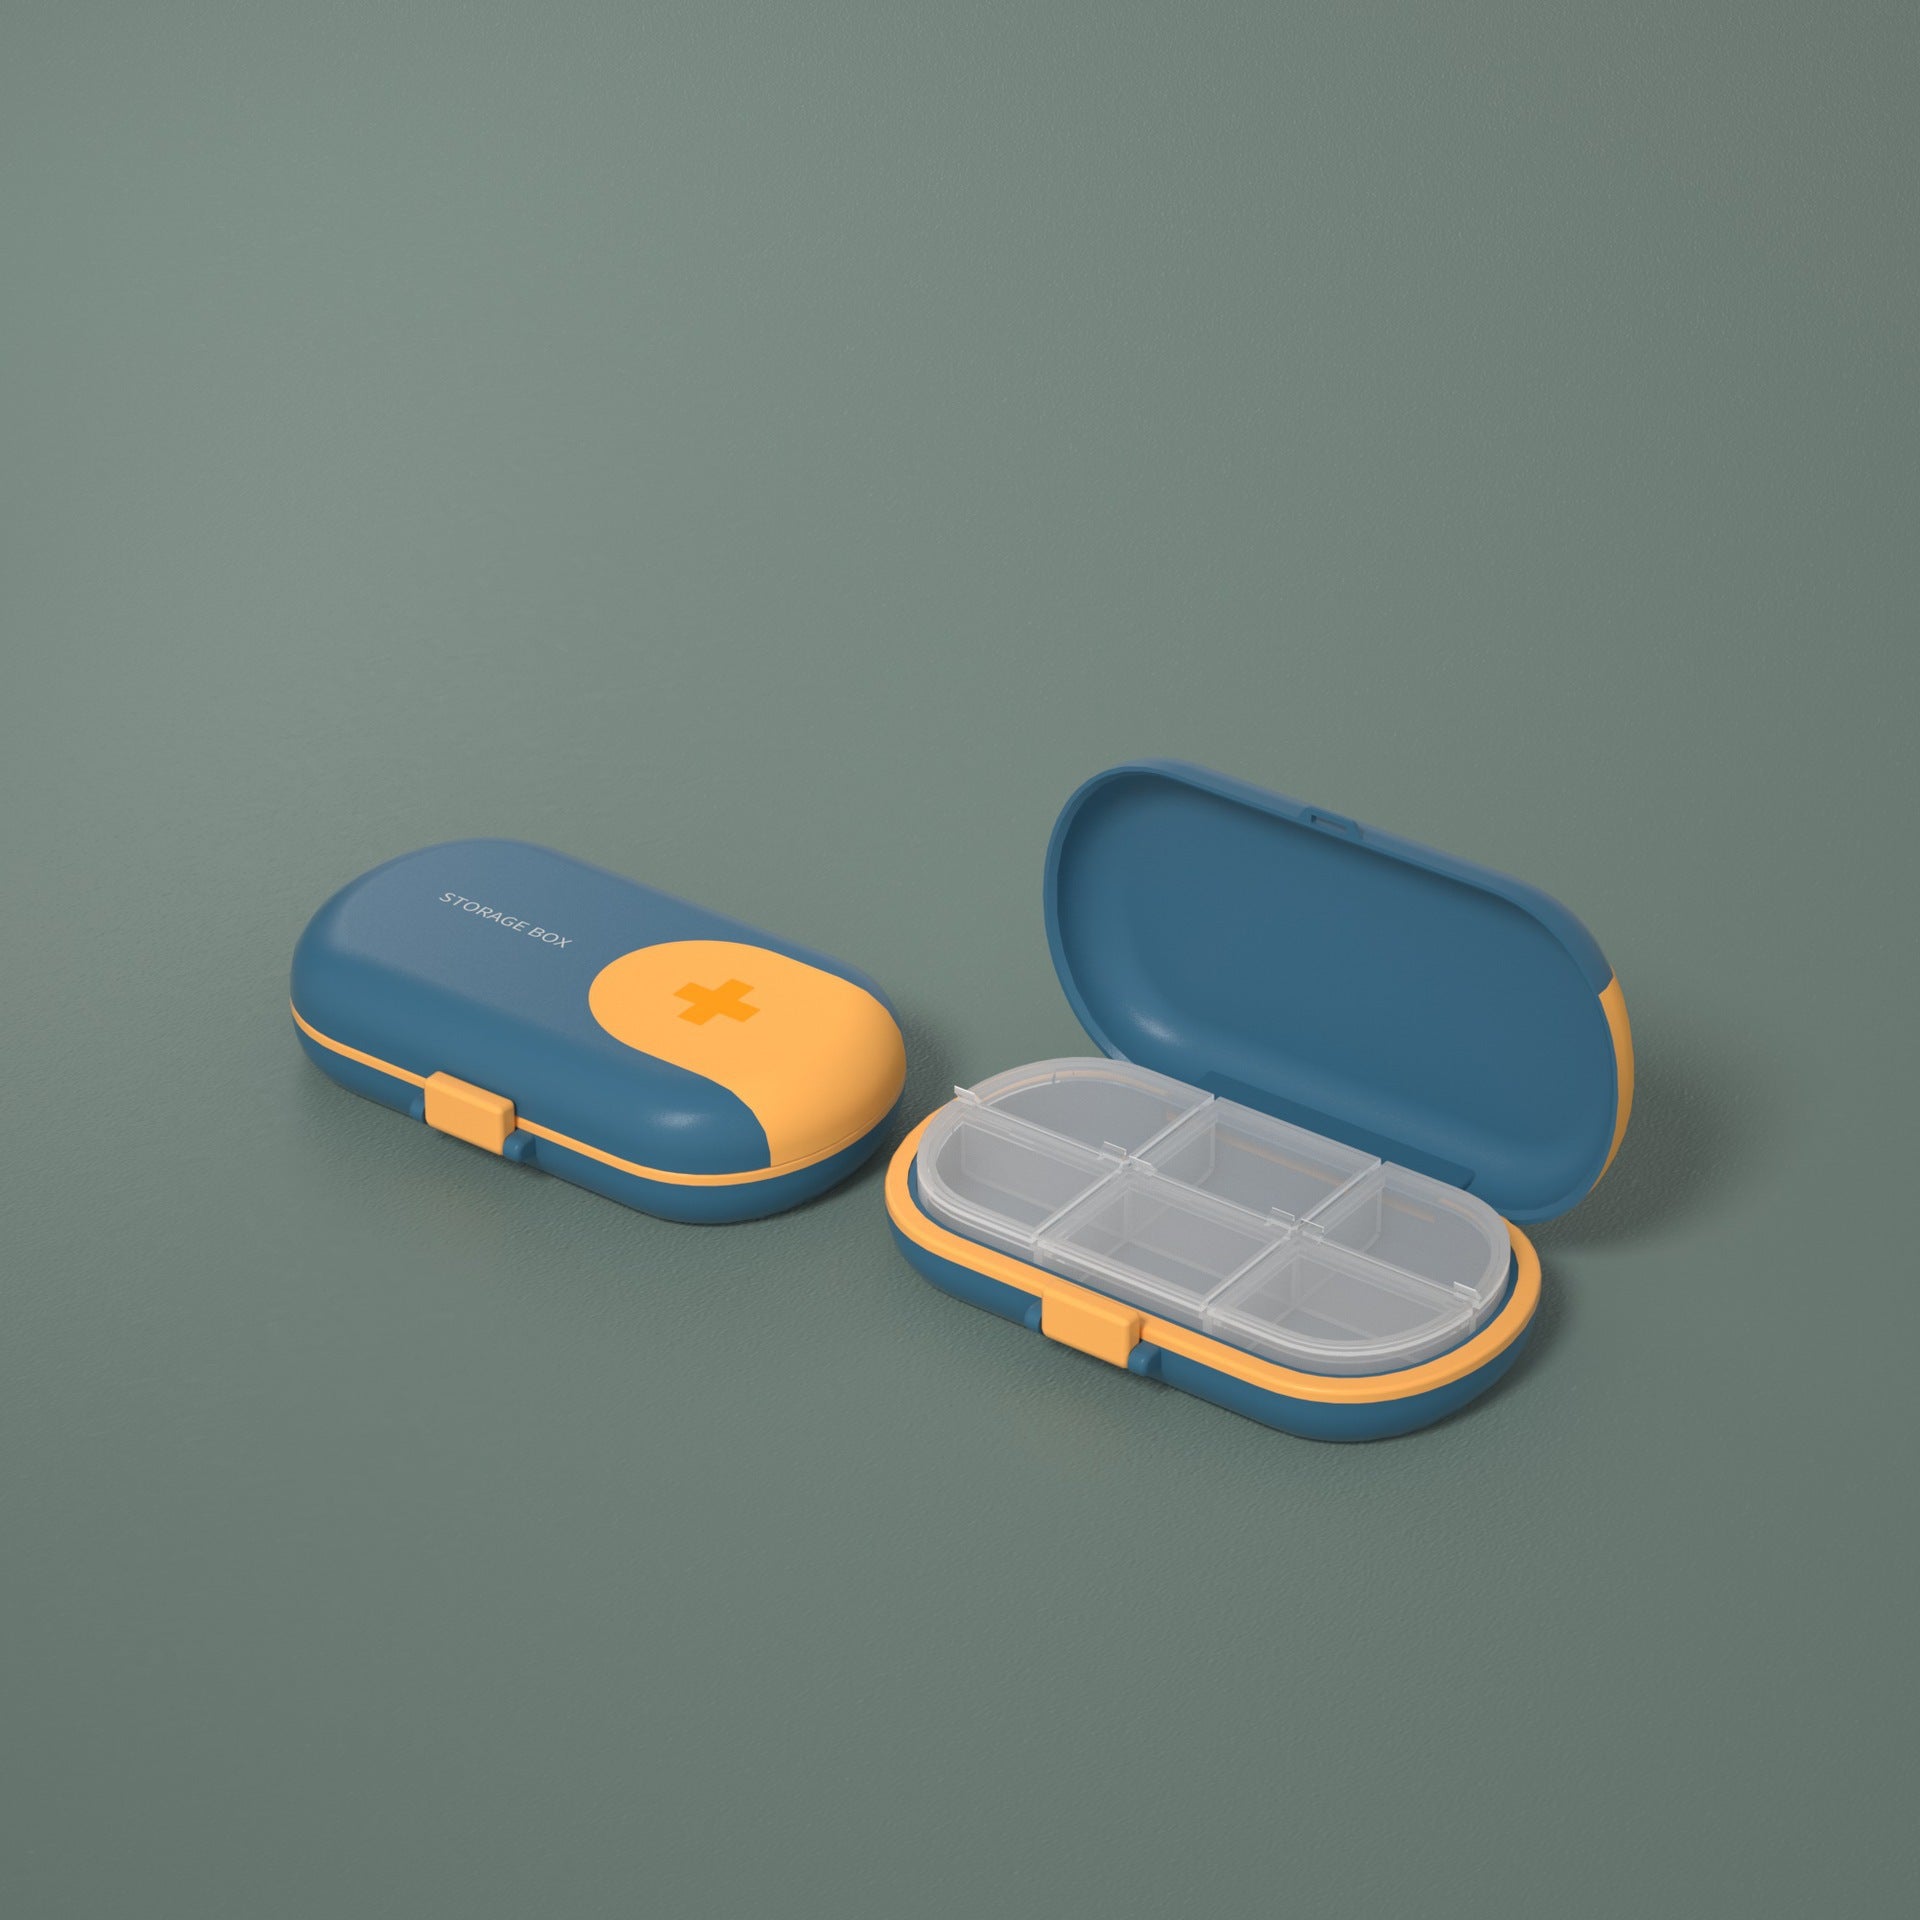 Portable Pill Box Small Packaging Travel Storage - Pillboxes -  Trend Goods